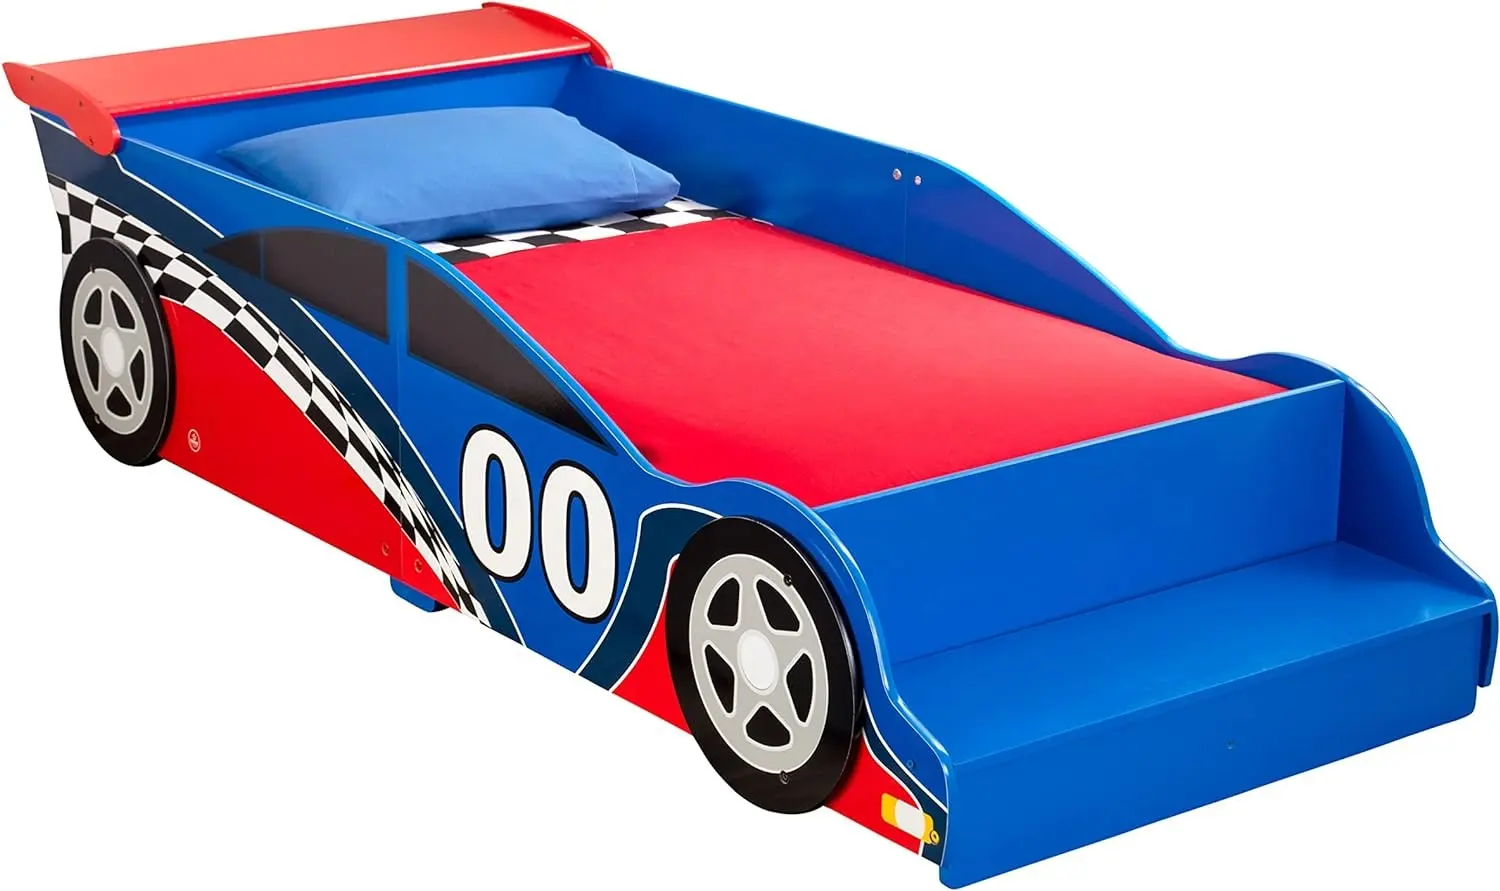 Toffy   Friends bed for kids kids racing bed kids bed